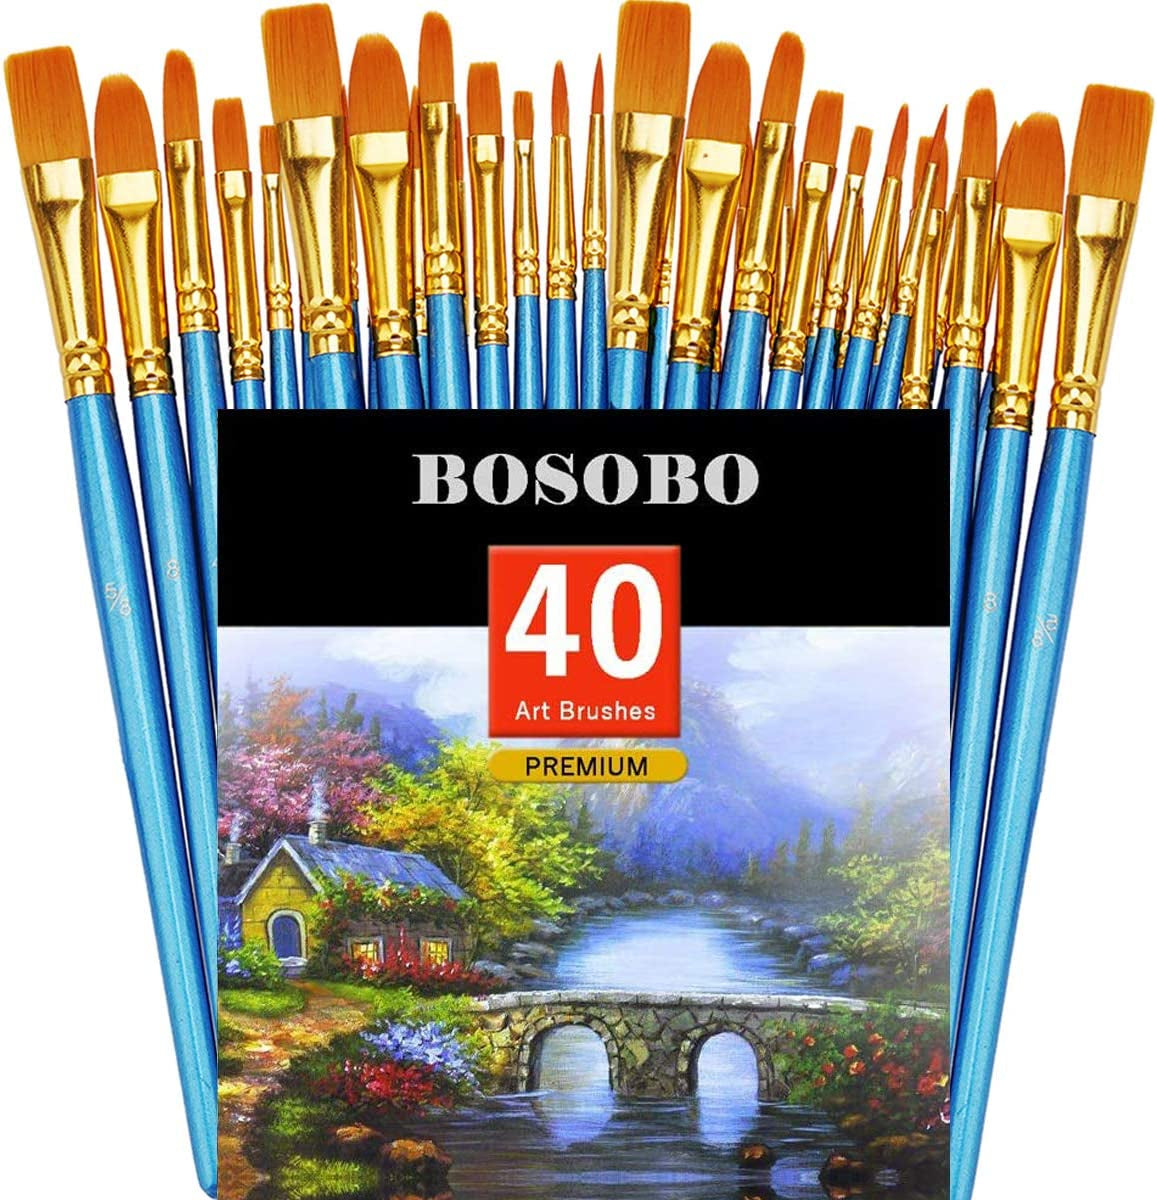 Paint Brushes Set, 2 Pack 20 Pcs Round-Pointed Tip Paintbrushes Nylon Hair Artist Acrylic Paint Brushes for Acrylic Oil Watercolor, Face Nail Art, Miniature Detailing & Rock Painting, Blue